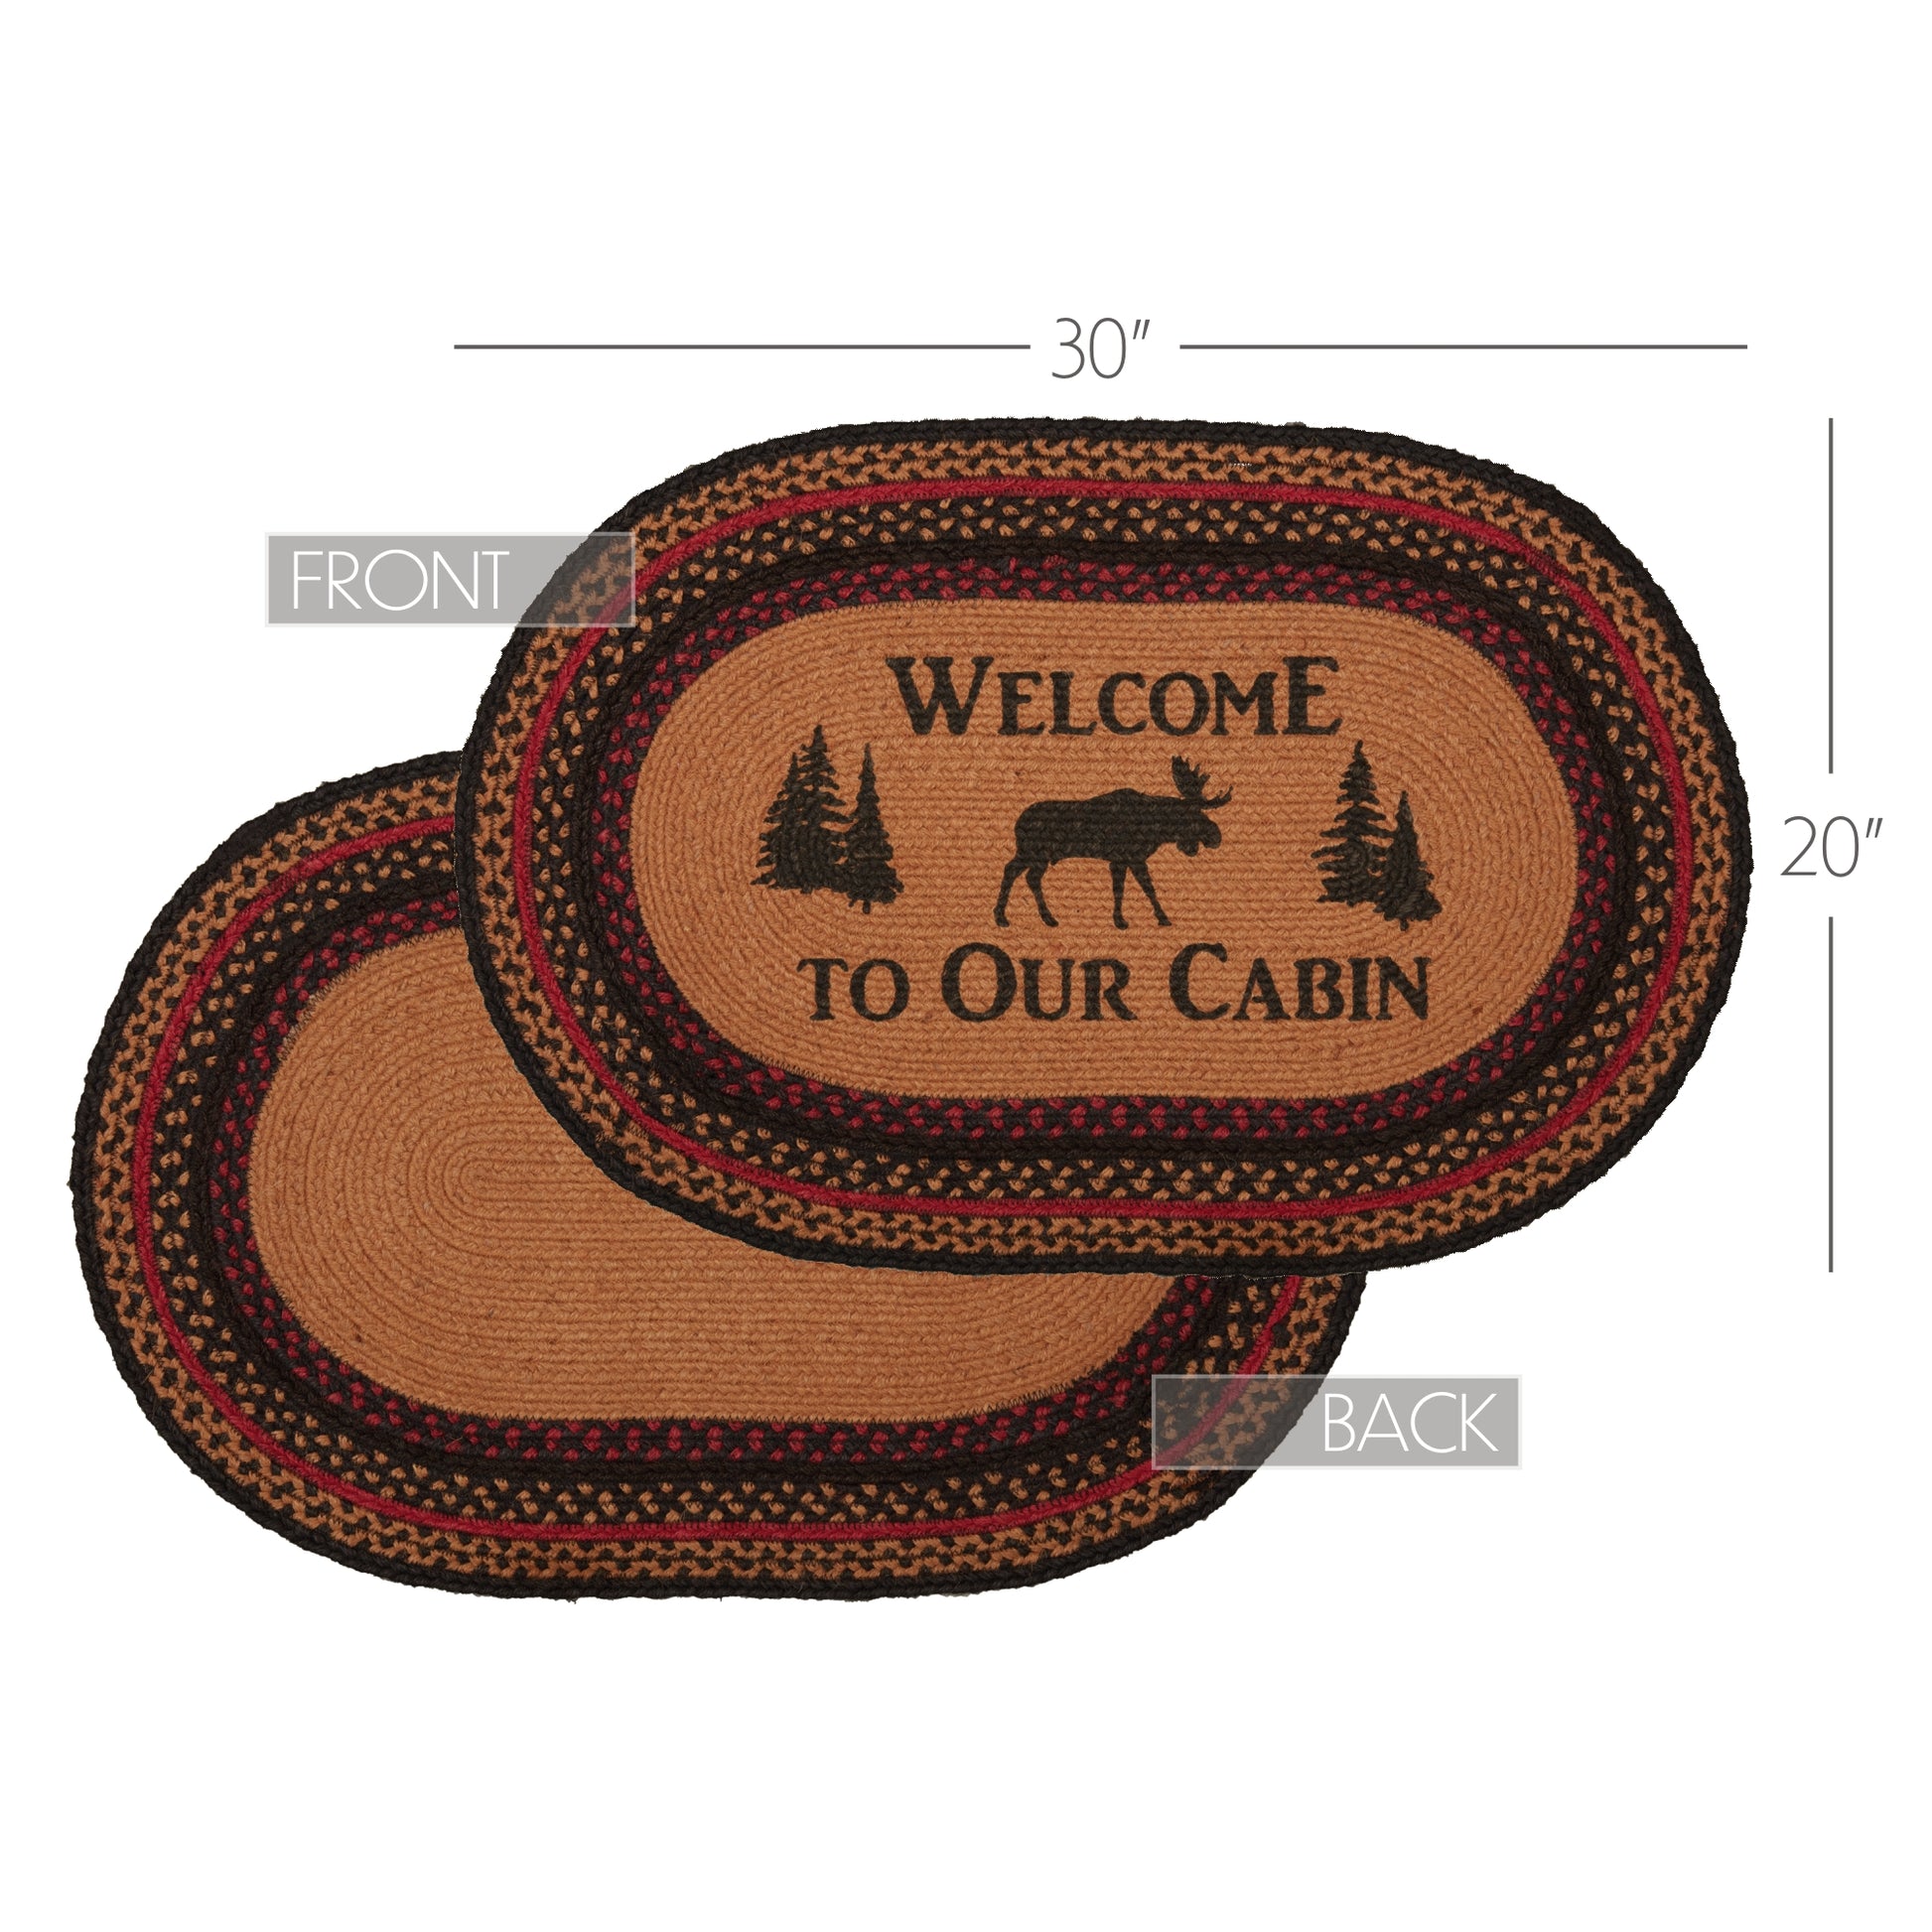 69484-Cumberland-Stenciled-Moose-Jute-Rug-Oval-Welcome-to-the-Cabin-w-Pad-20x30-image-3